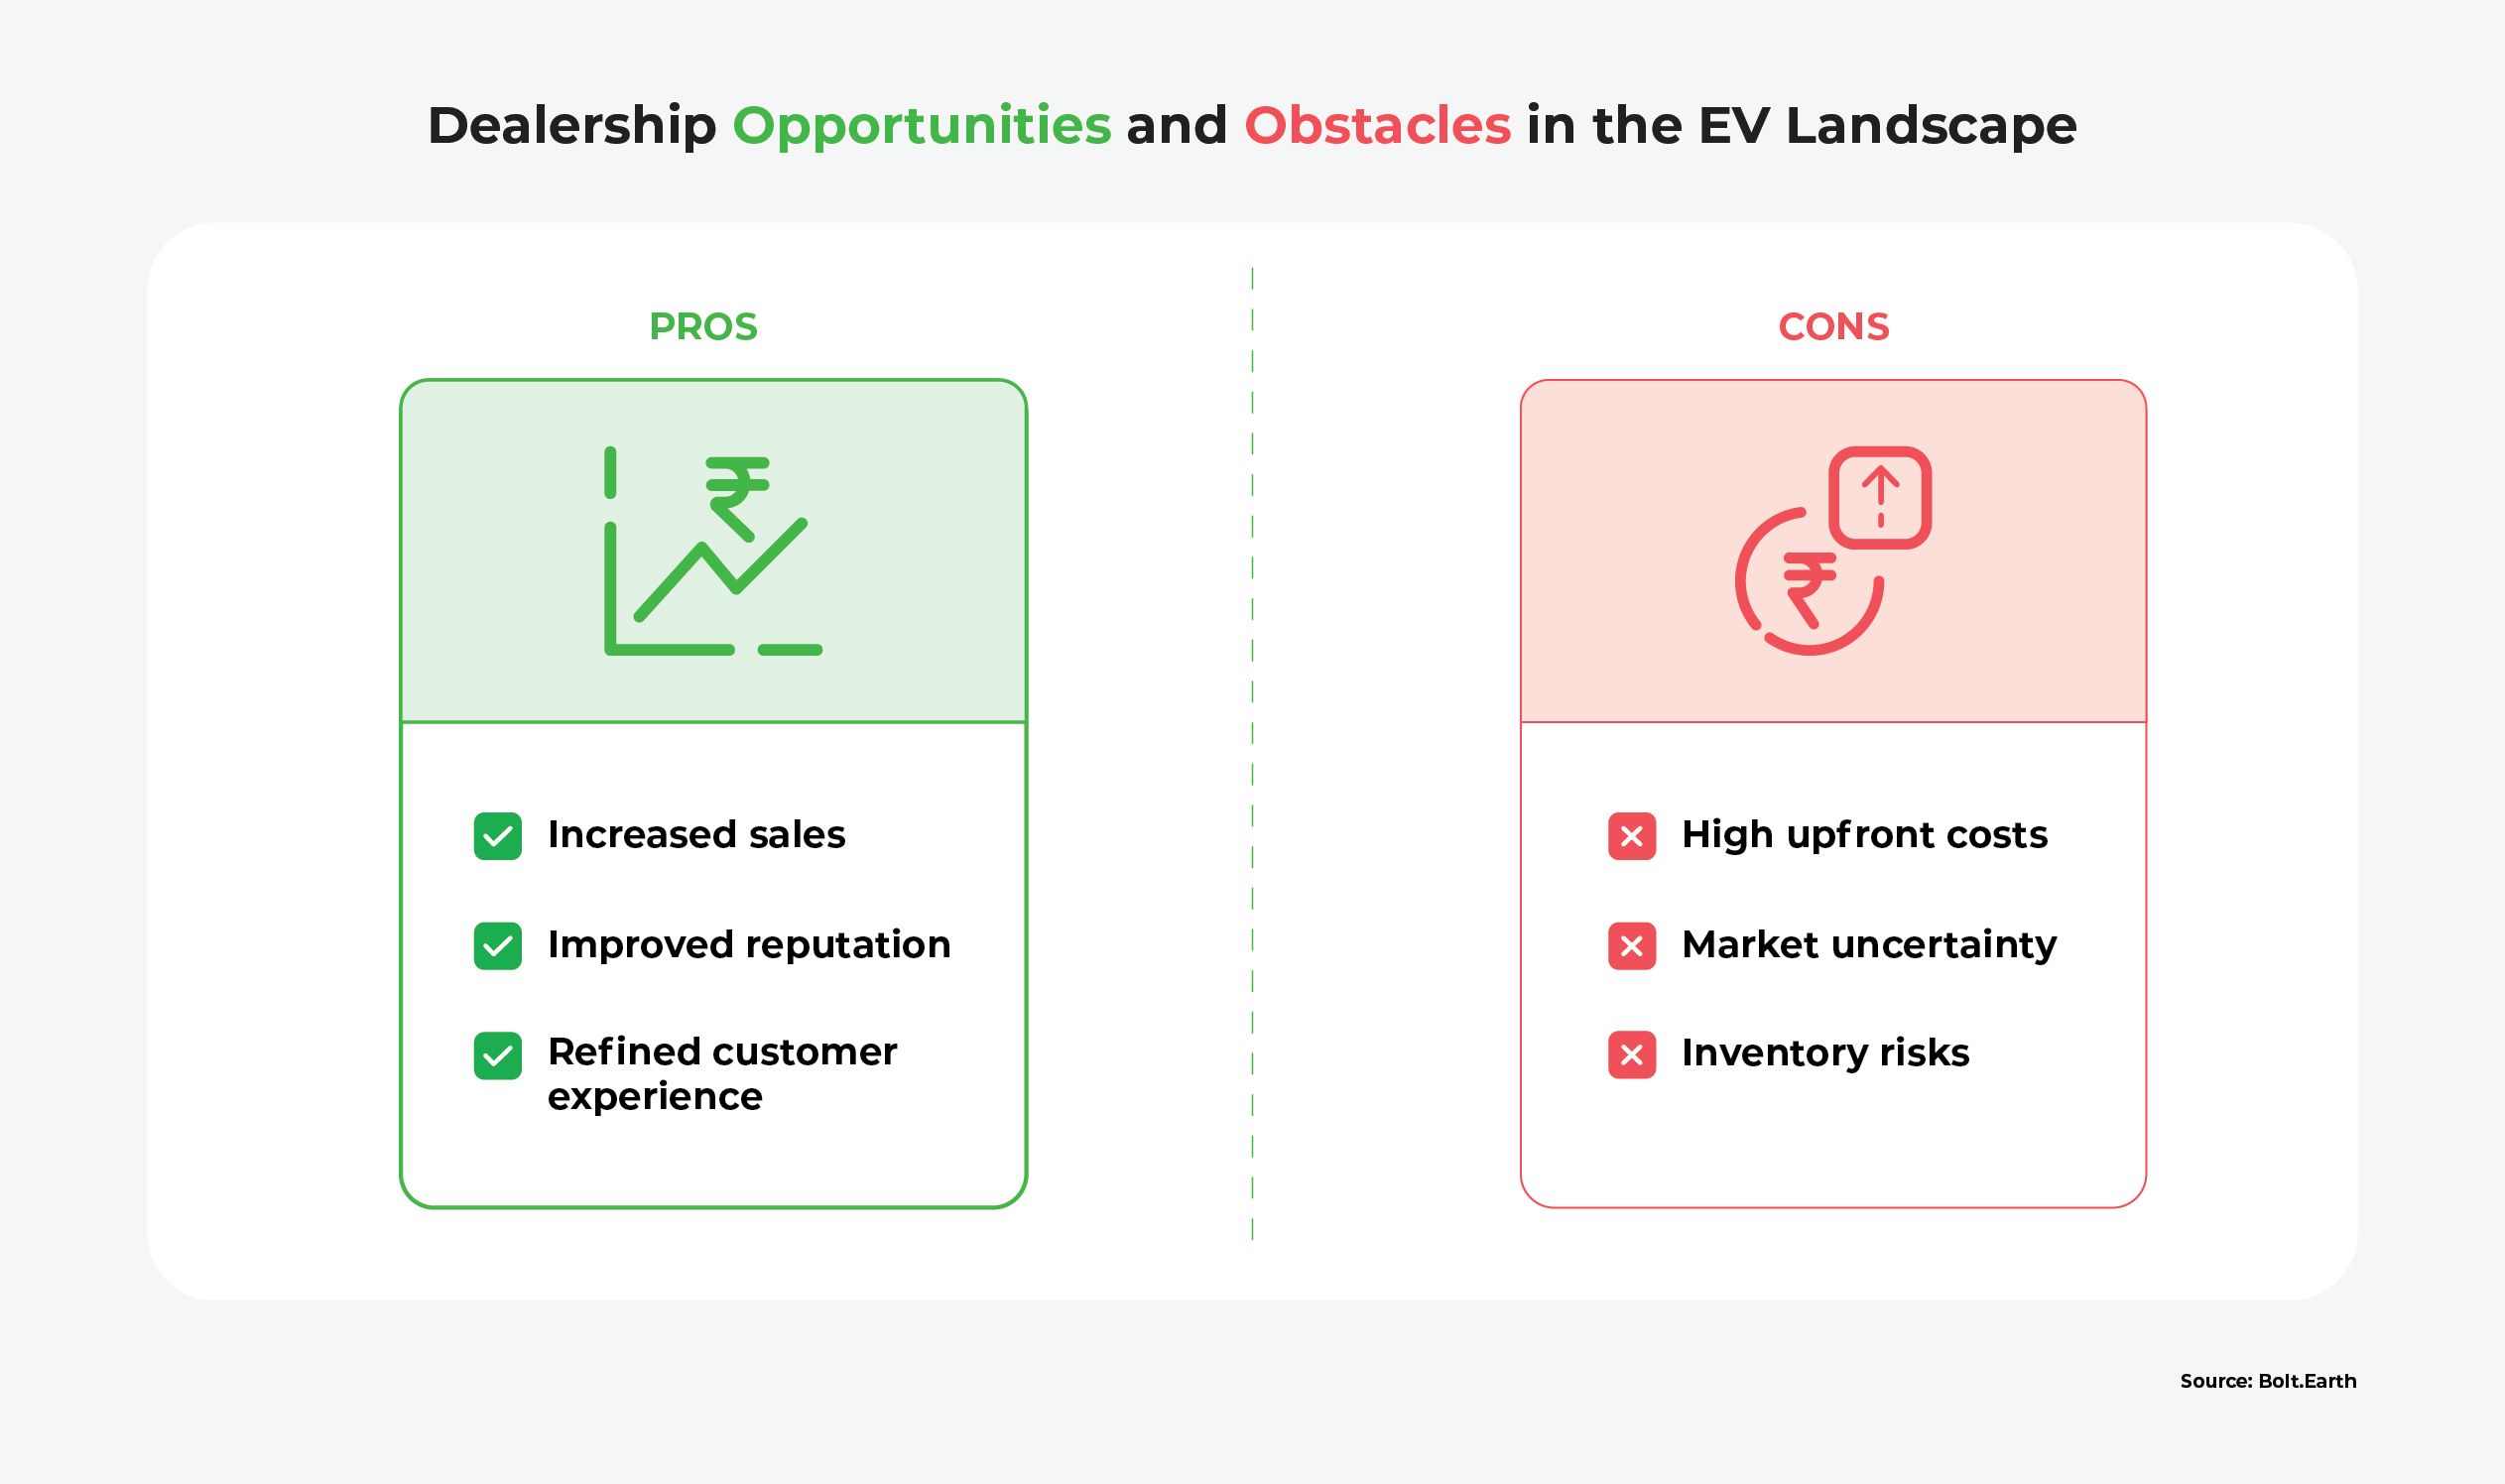 Dealership pros and cons for embracing EV tech